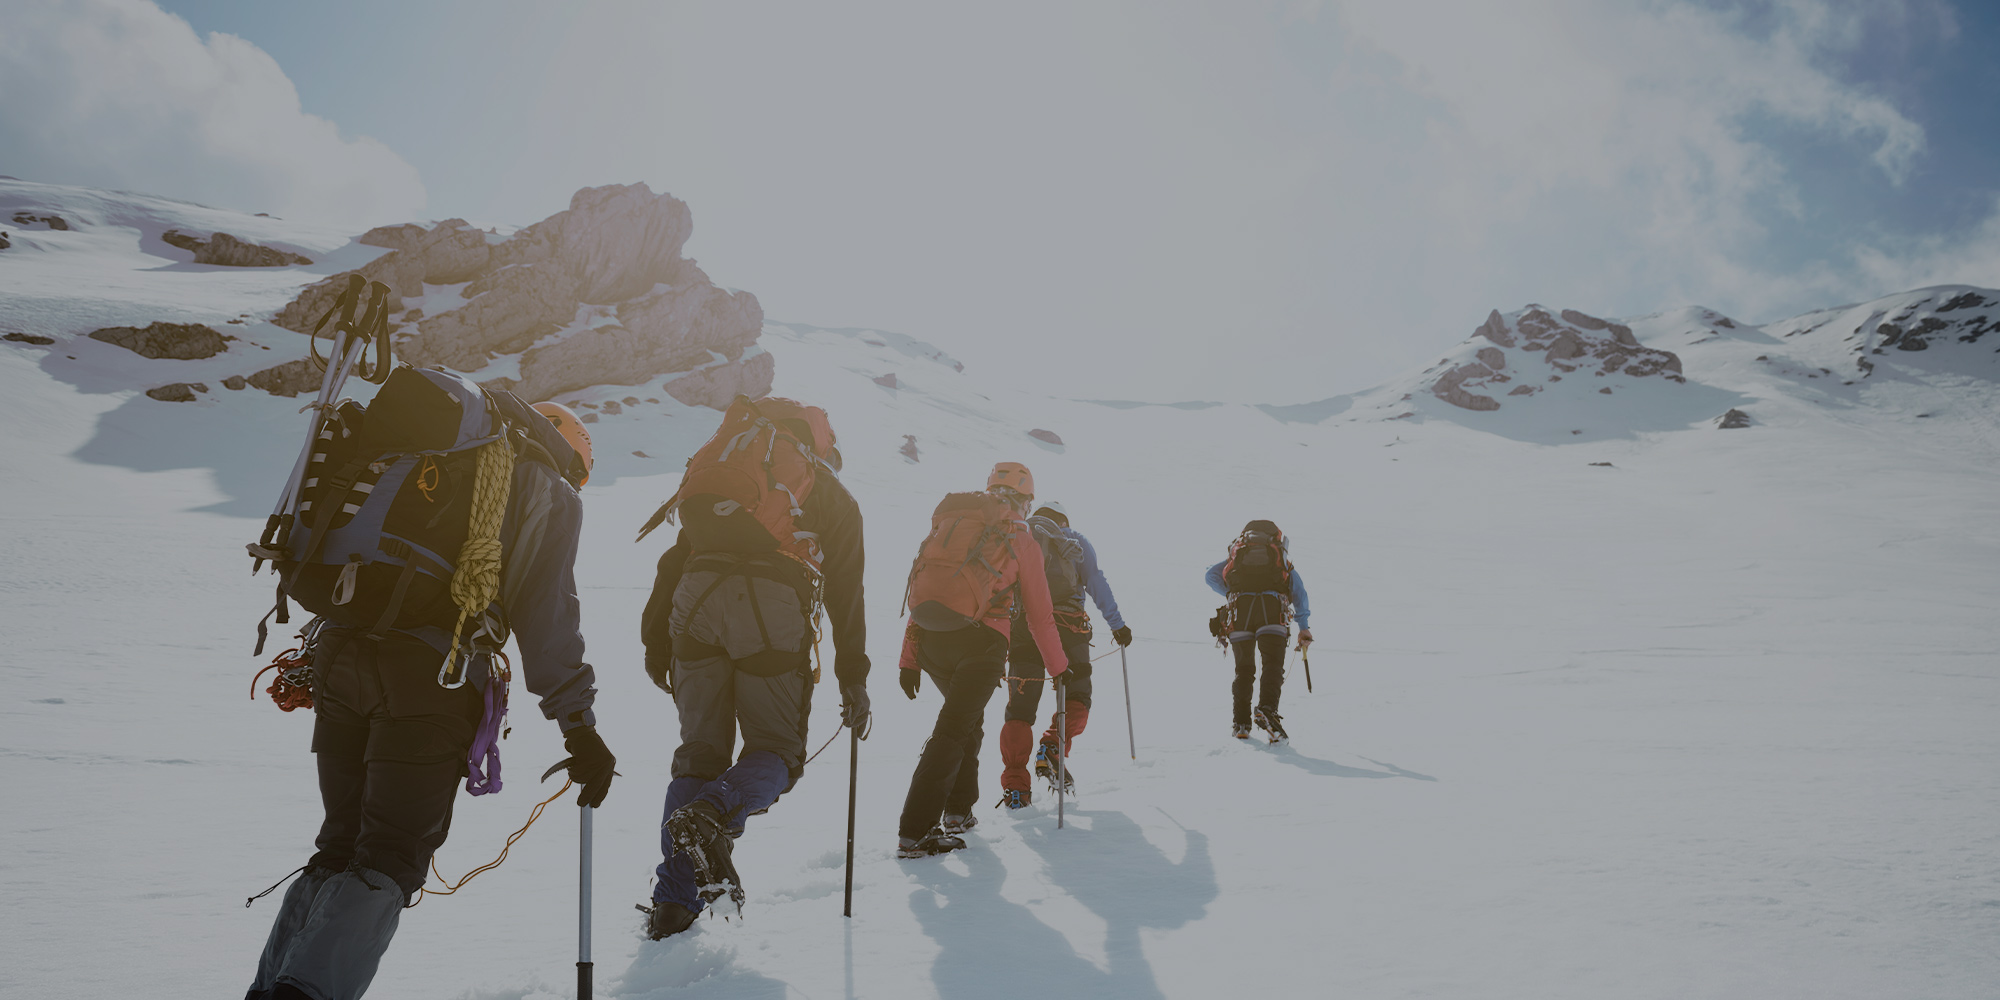 Hikers Climbing Up Snowy Mountain